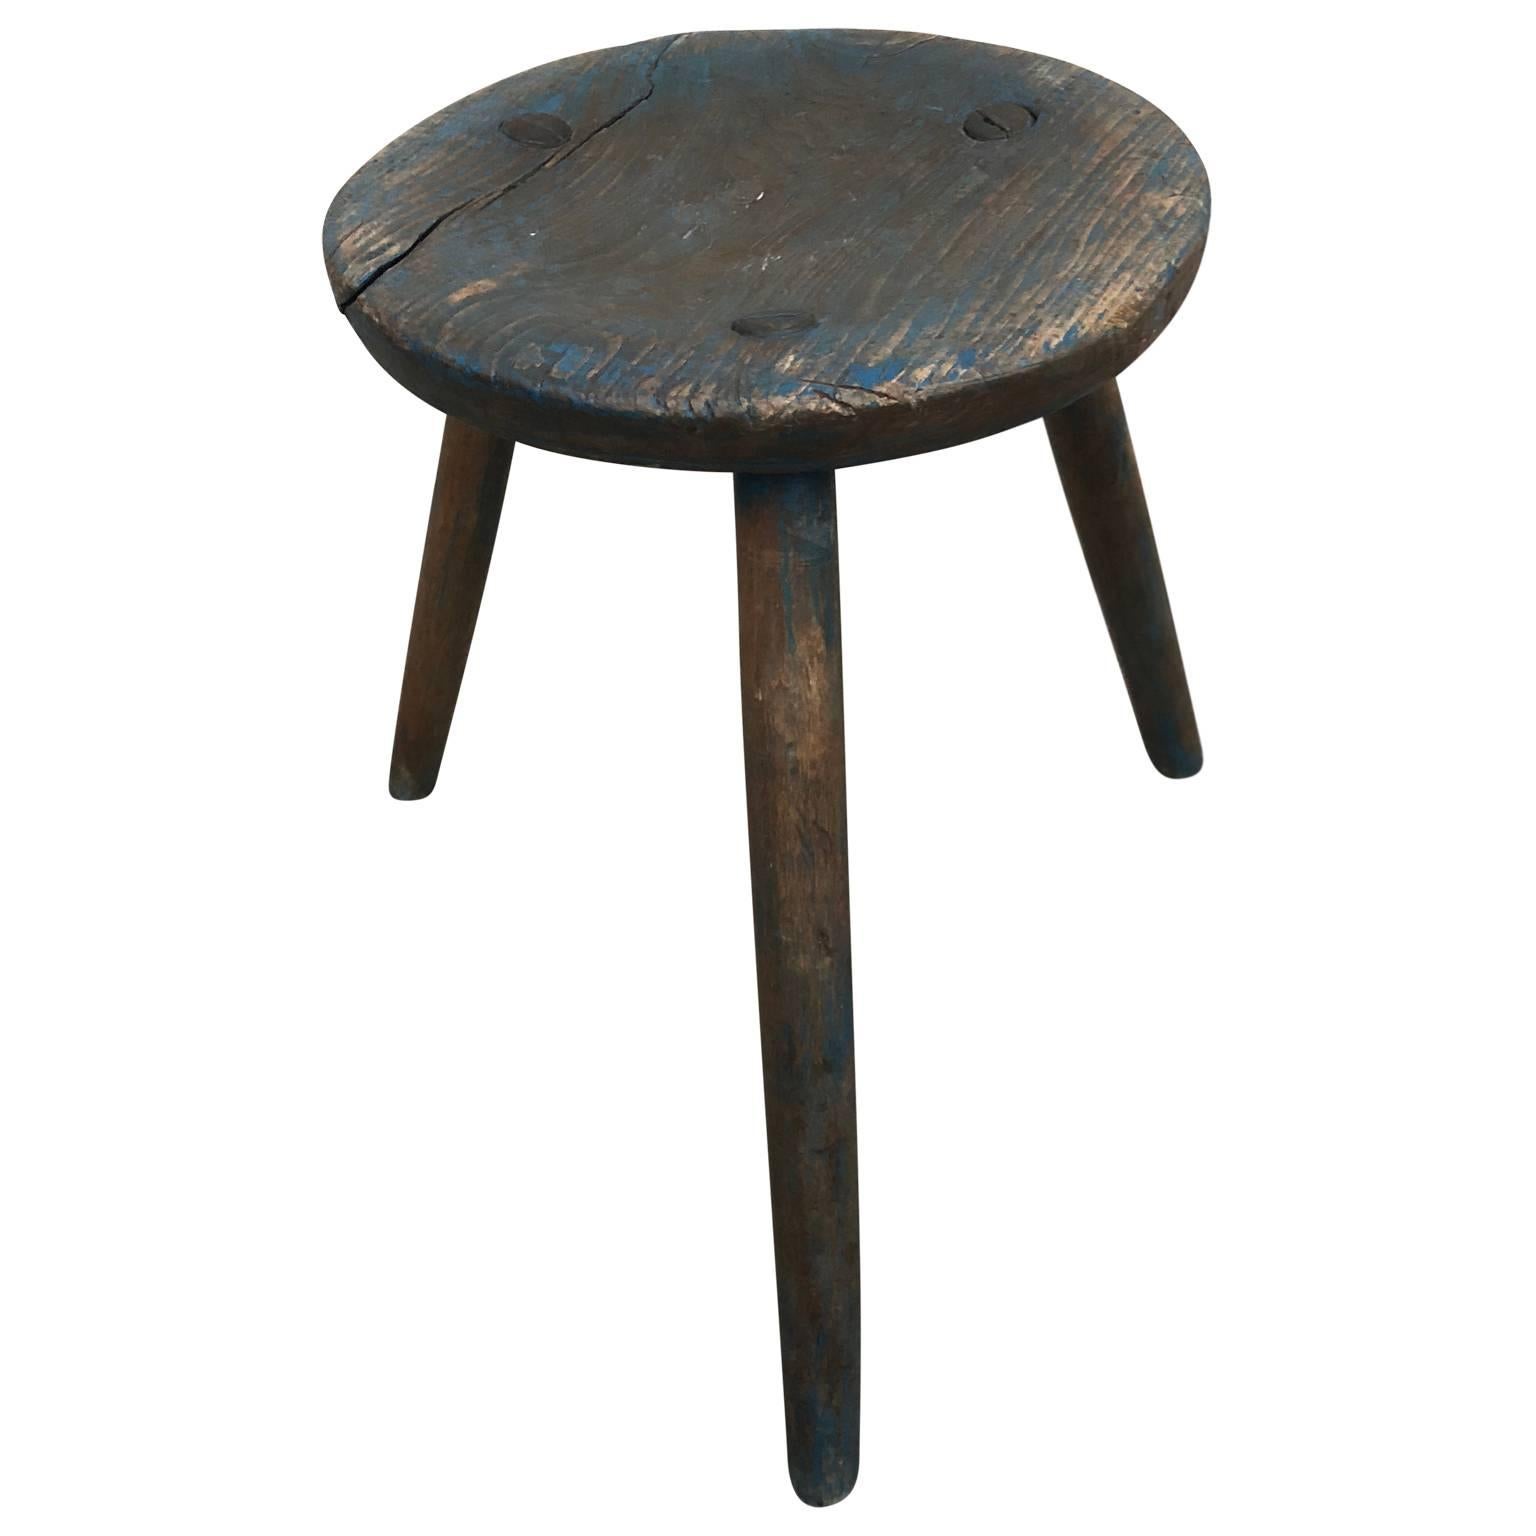 Three-legged stool with remnants of the original Gustavian blue paint. Stool has a old charming metal repair to enhance the strength, it is in good sturdy and working condition.